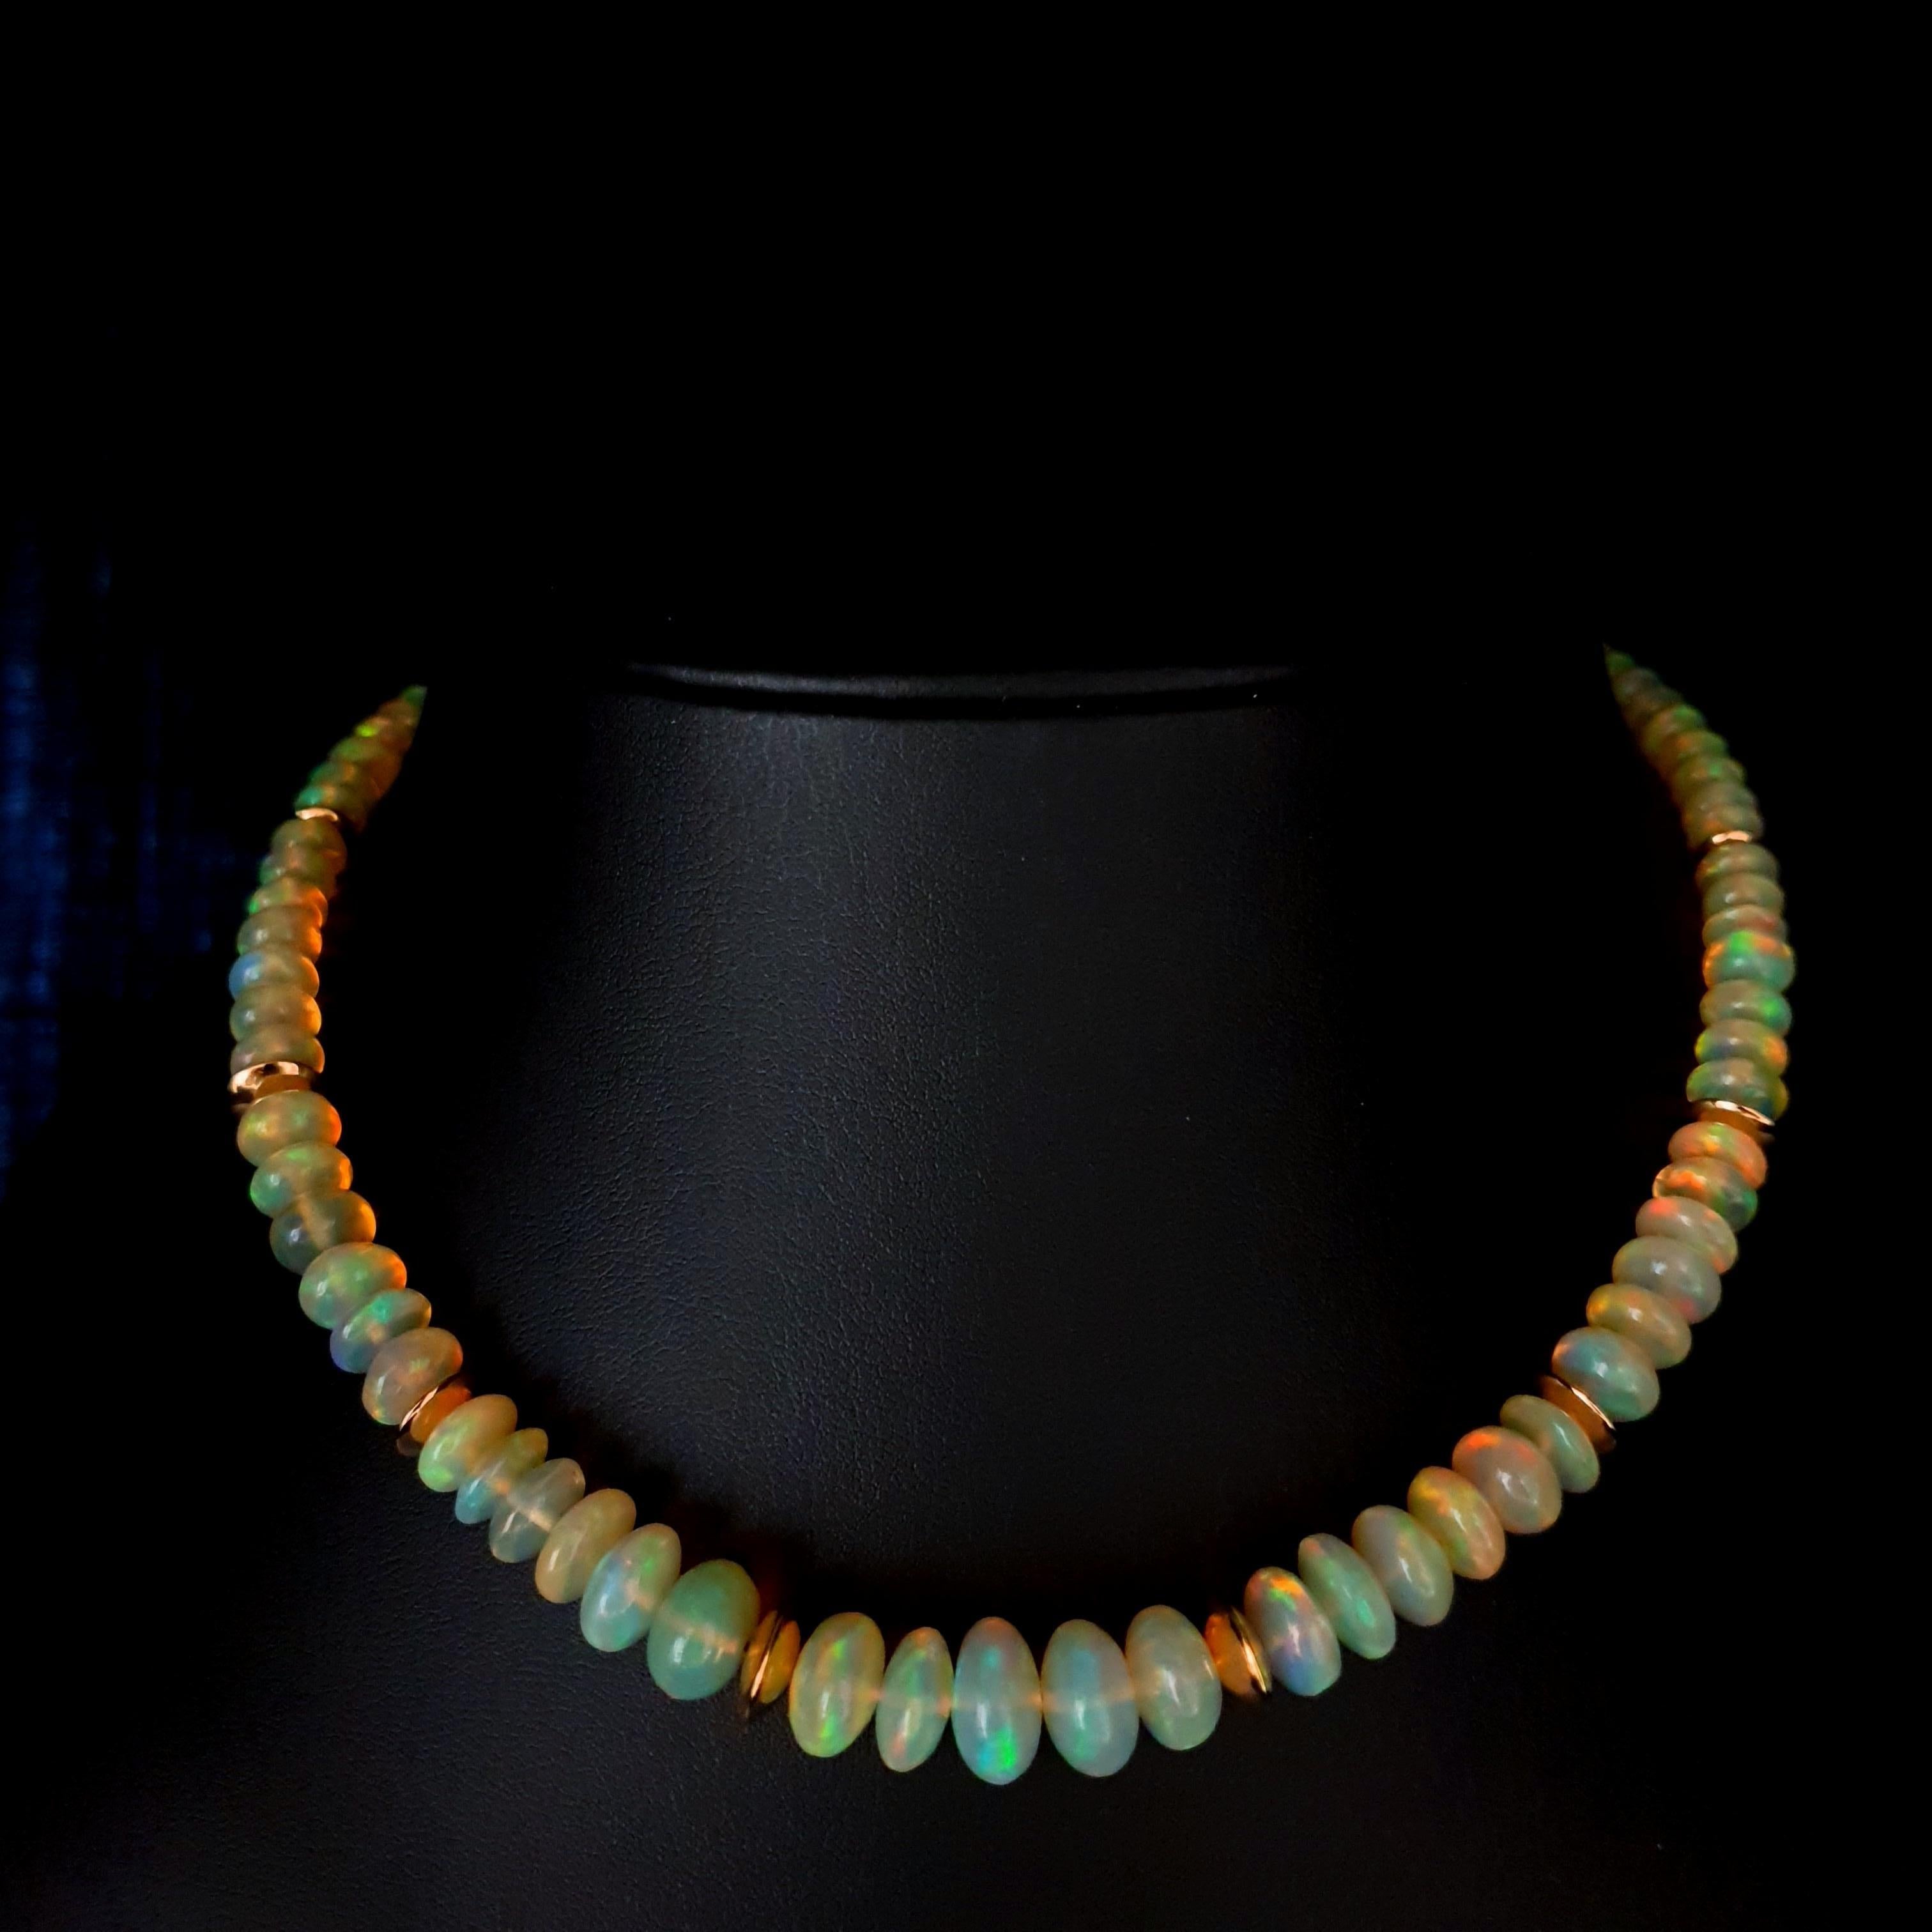 This Exceptional Crispy Sparkling Opal Rondel Beaded Necklace with 18 Carat Rose Gold is totally handmade. Cutting as well as goldwork are made in German quality. The screw clasp is easy to handle and very secure.
Timeless and classic design